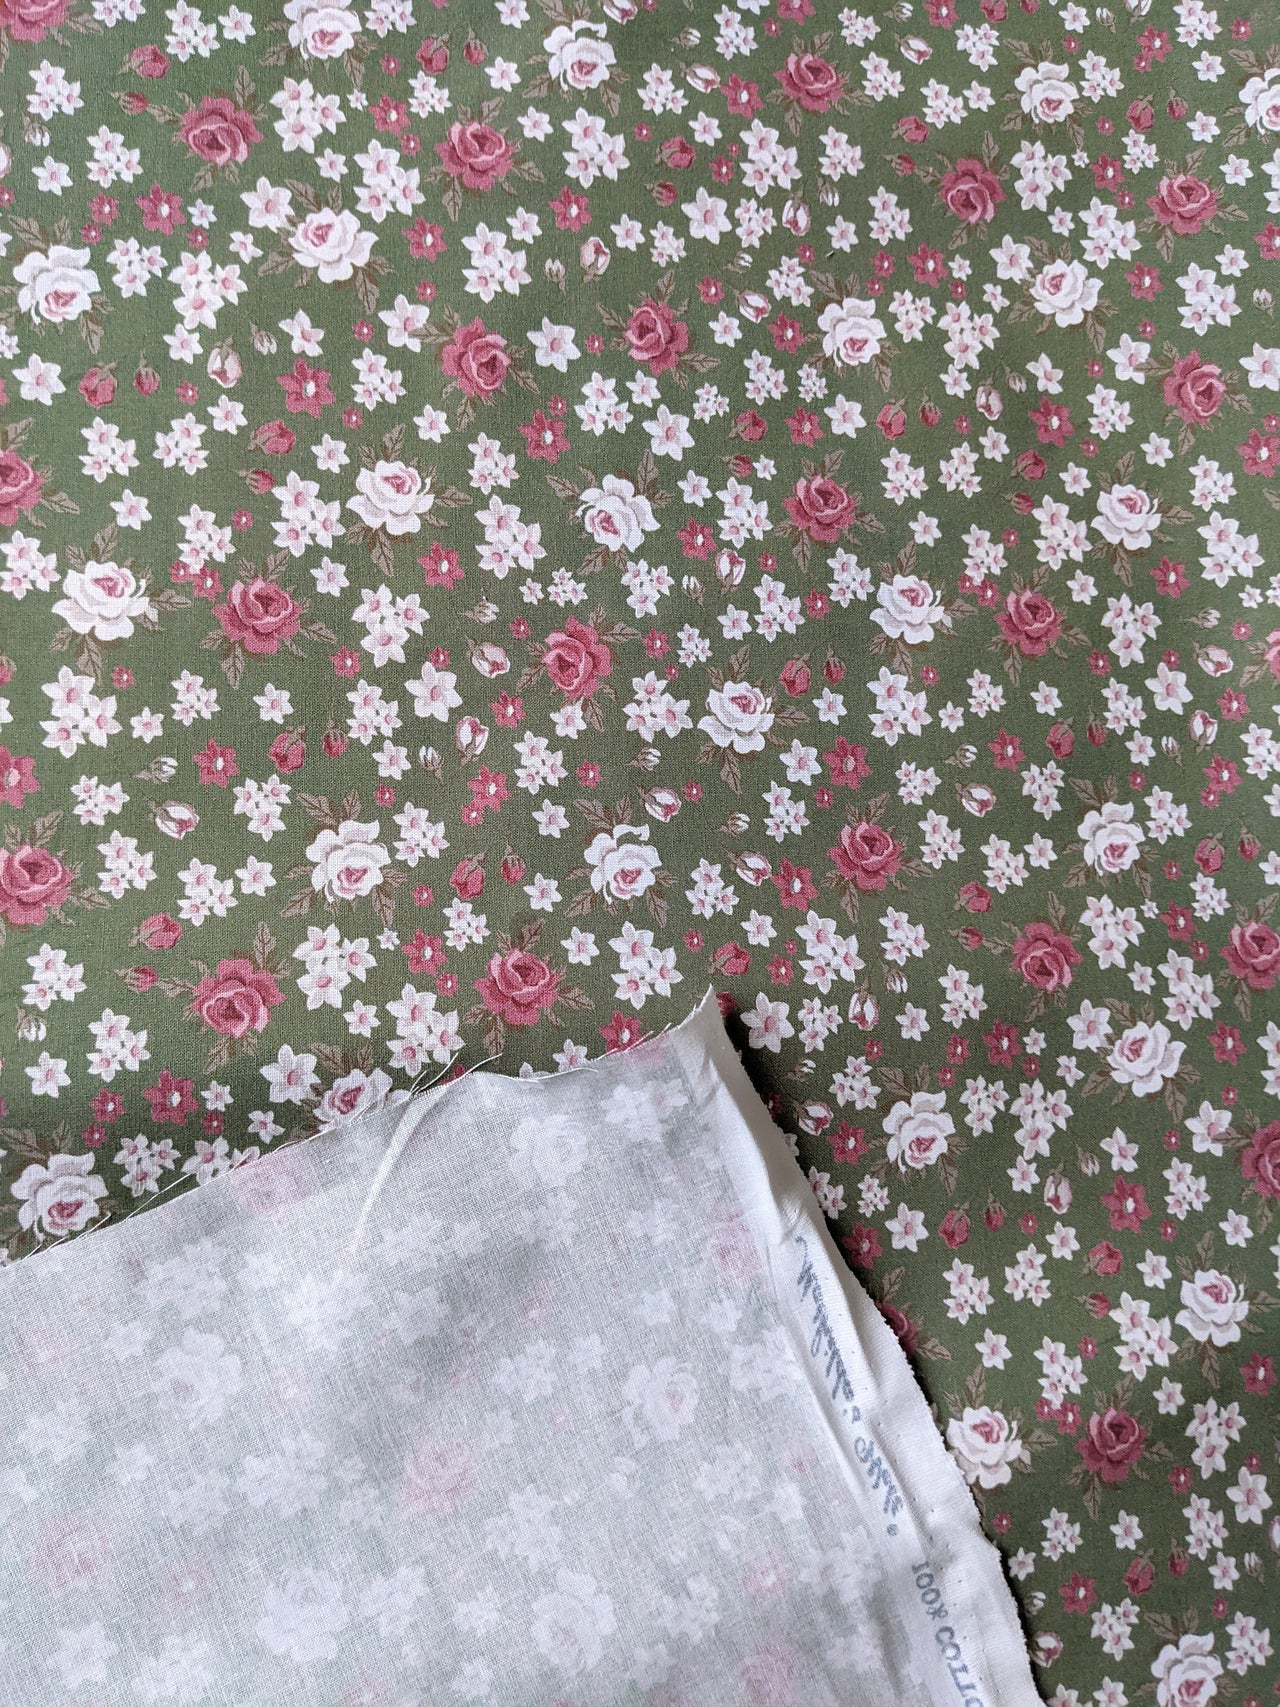 Green And Pink Fabric, 100 % Cotton Rose Floral Fabric, Roses Flower Fabric